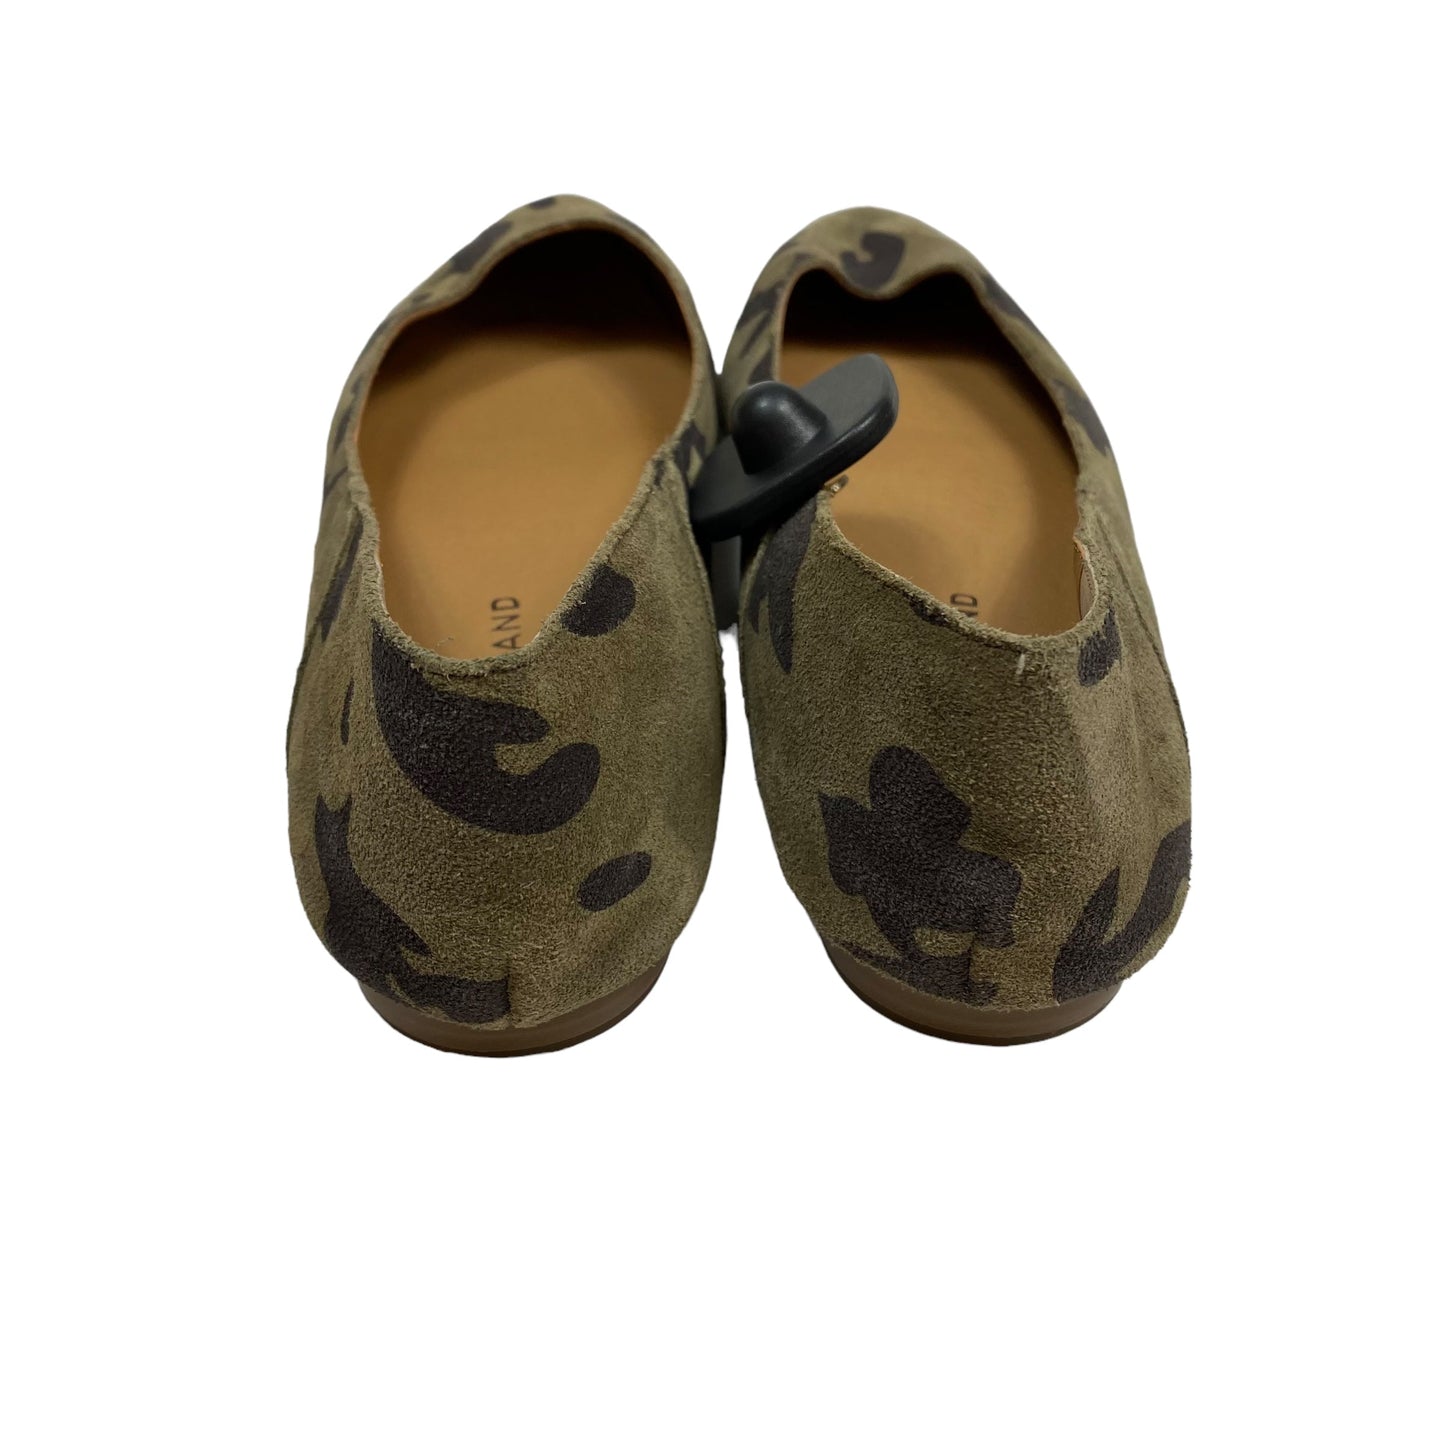 Camouflage Print Shoes Flats Lucky Brand, Size 7.5